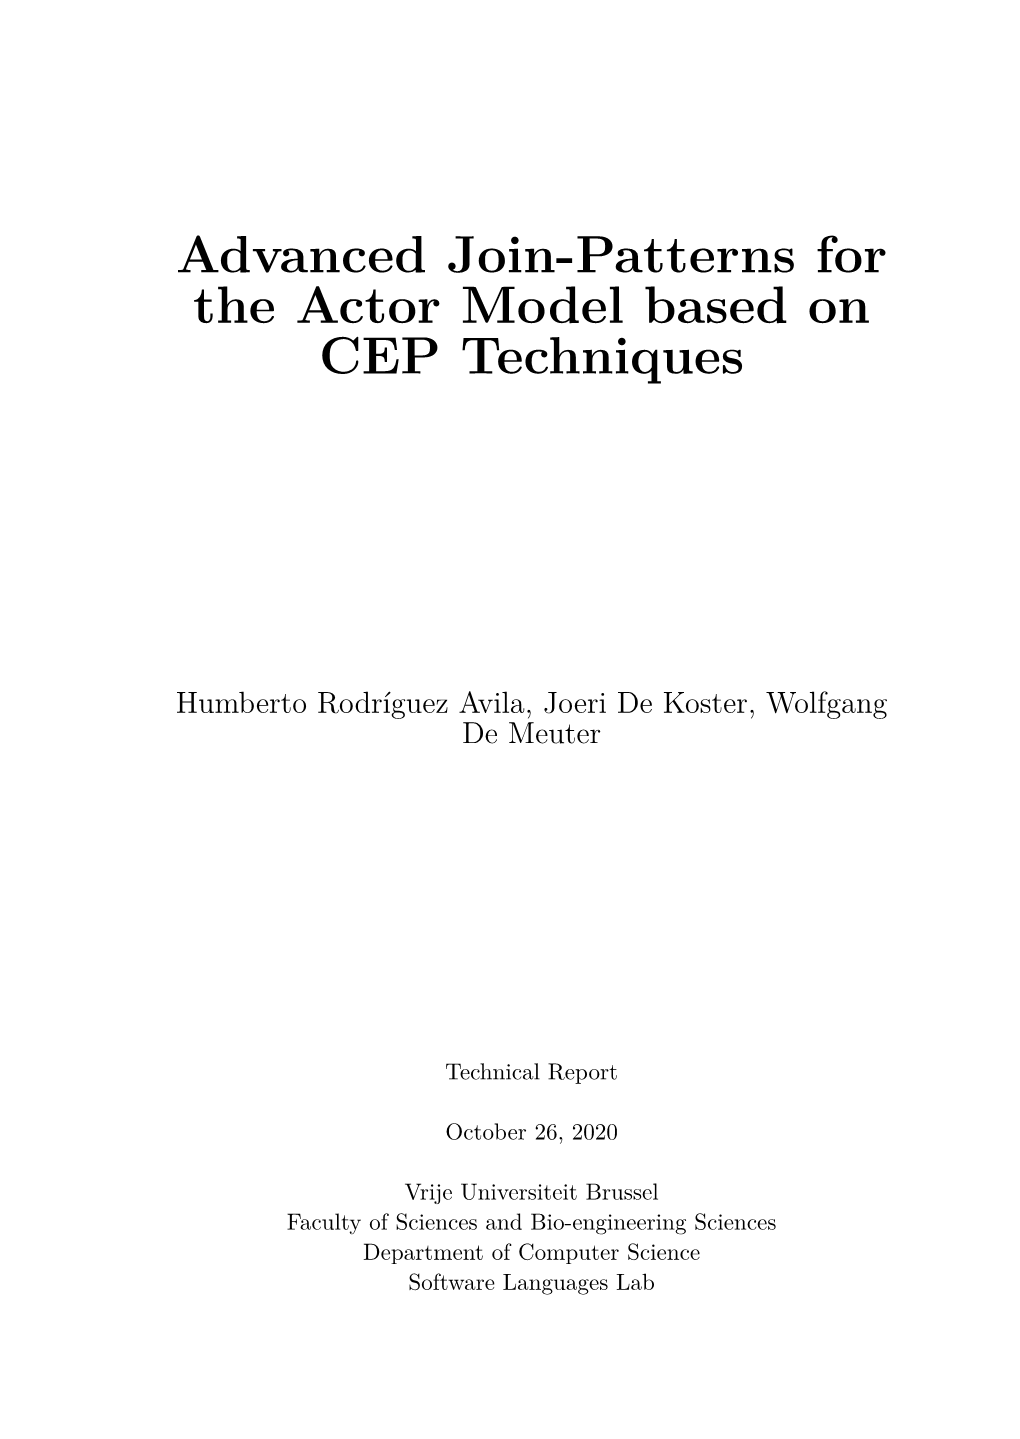 Advanced Join-Patterns for the Actor Model Based on CEP Techniques